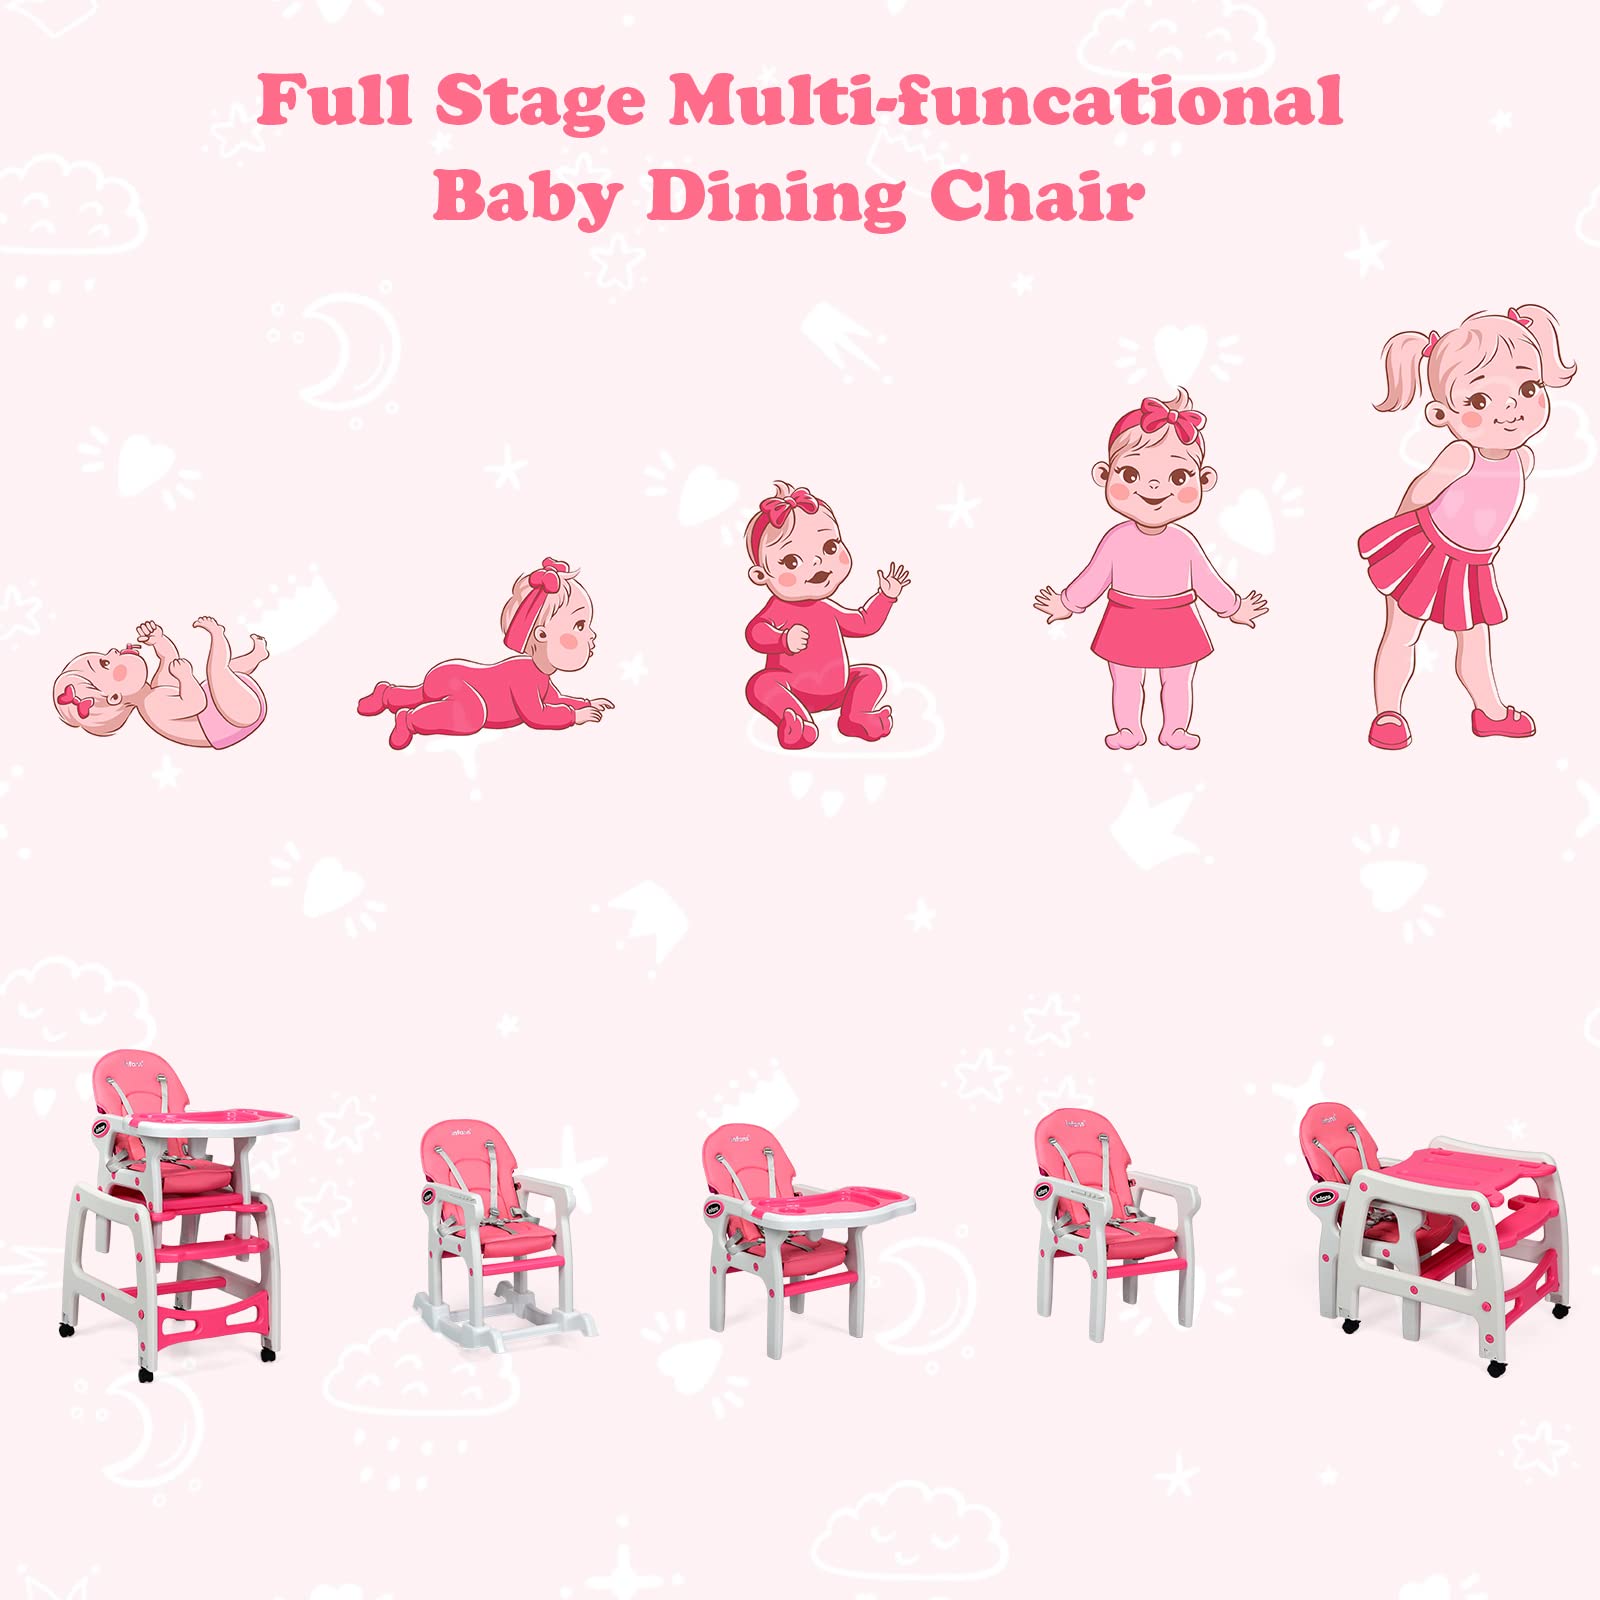 INFANS 5 in 1 Baby High Chair, Convertible Toddler Table Chair Set, Rocking Chair, Multi-Function Seat with Lockable Universal Wheels, Adjustable Seat Back, Removable Trays (Pink)